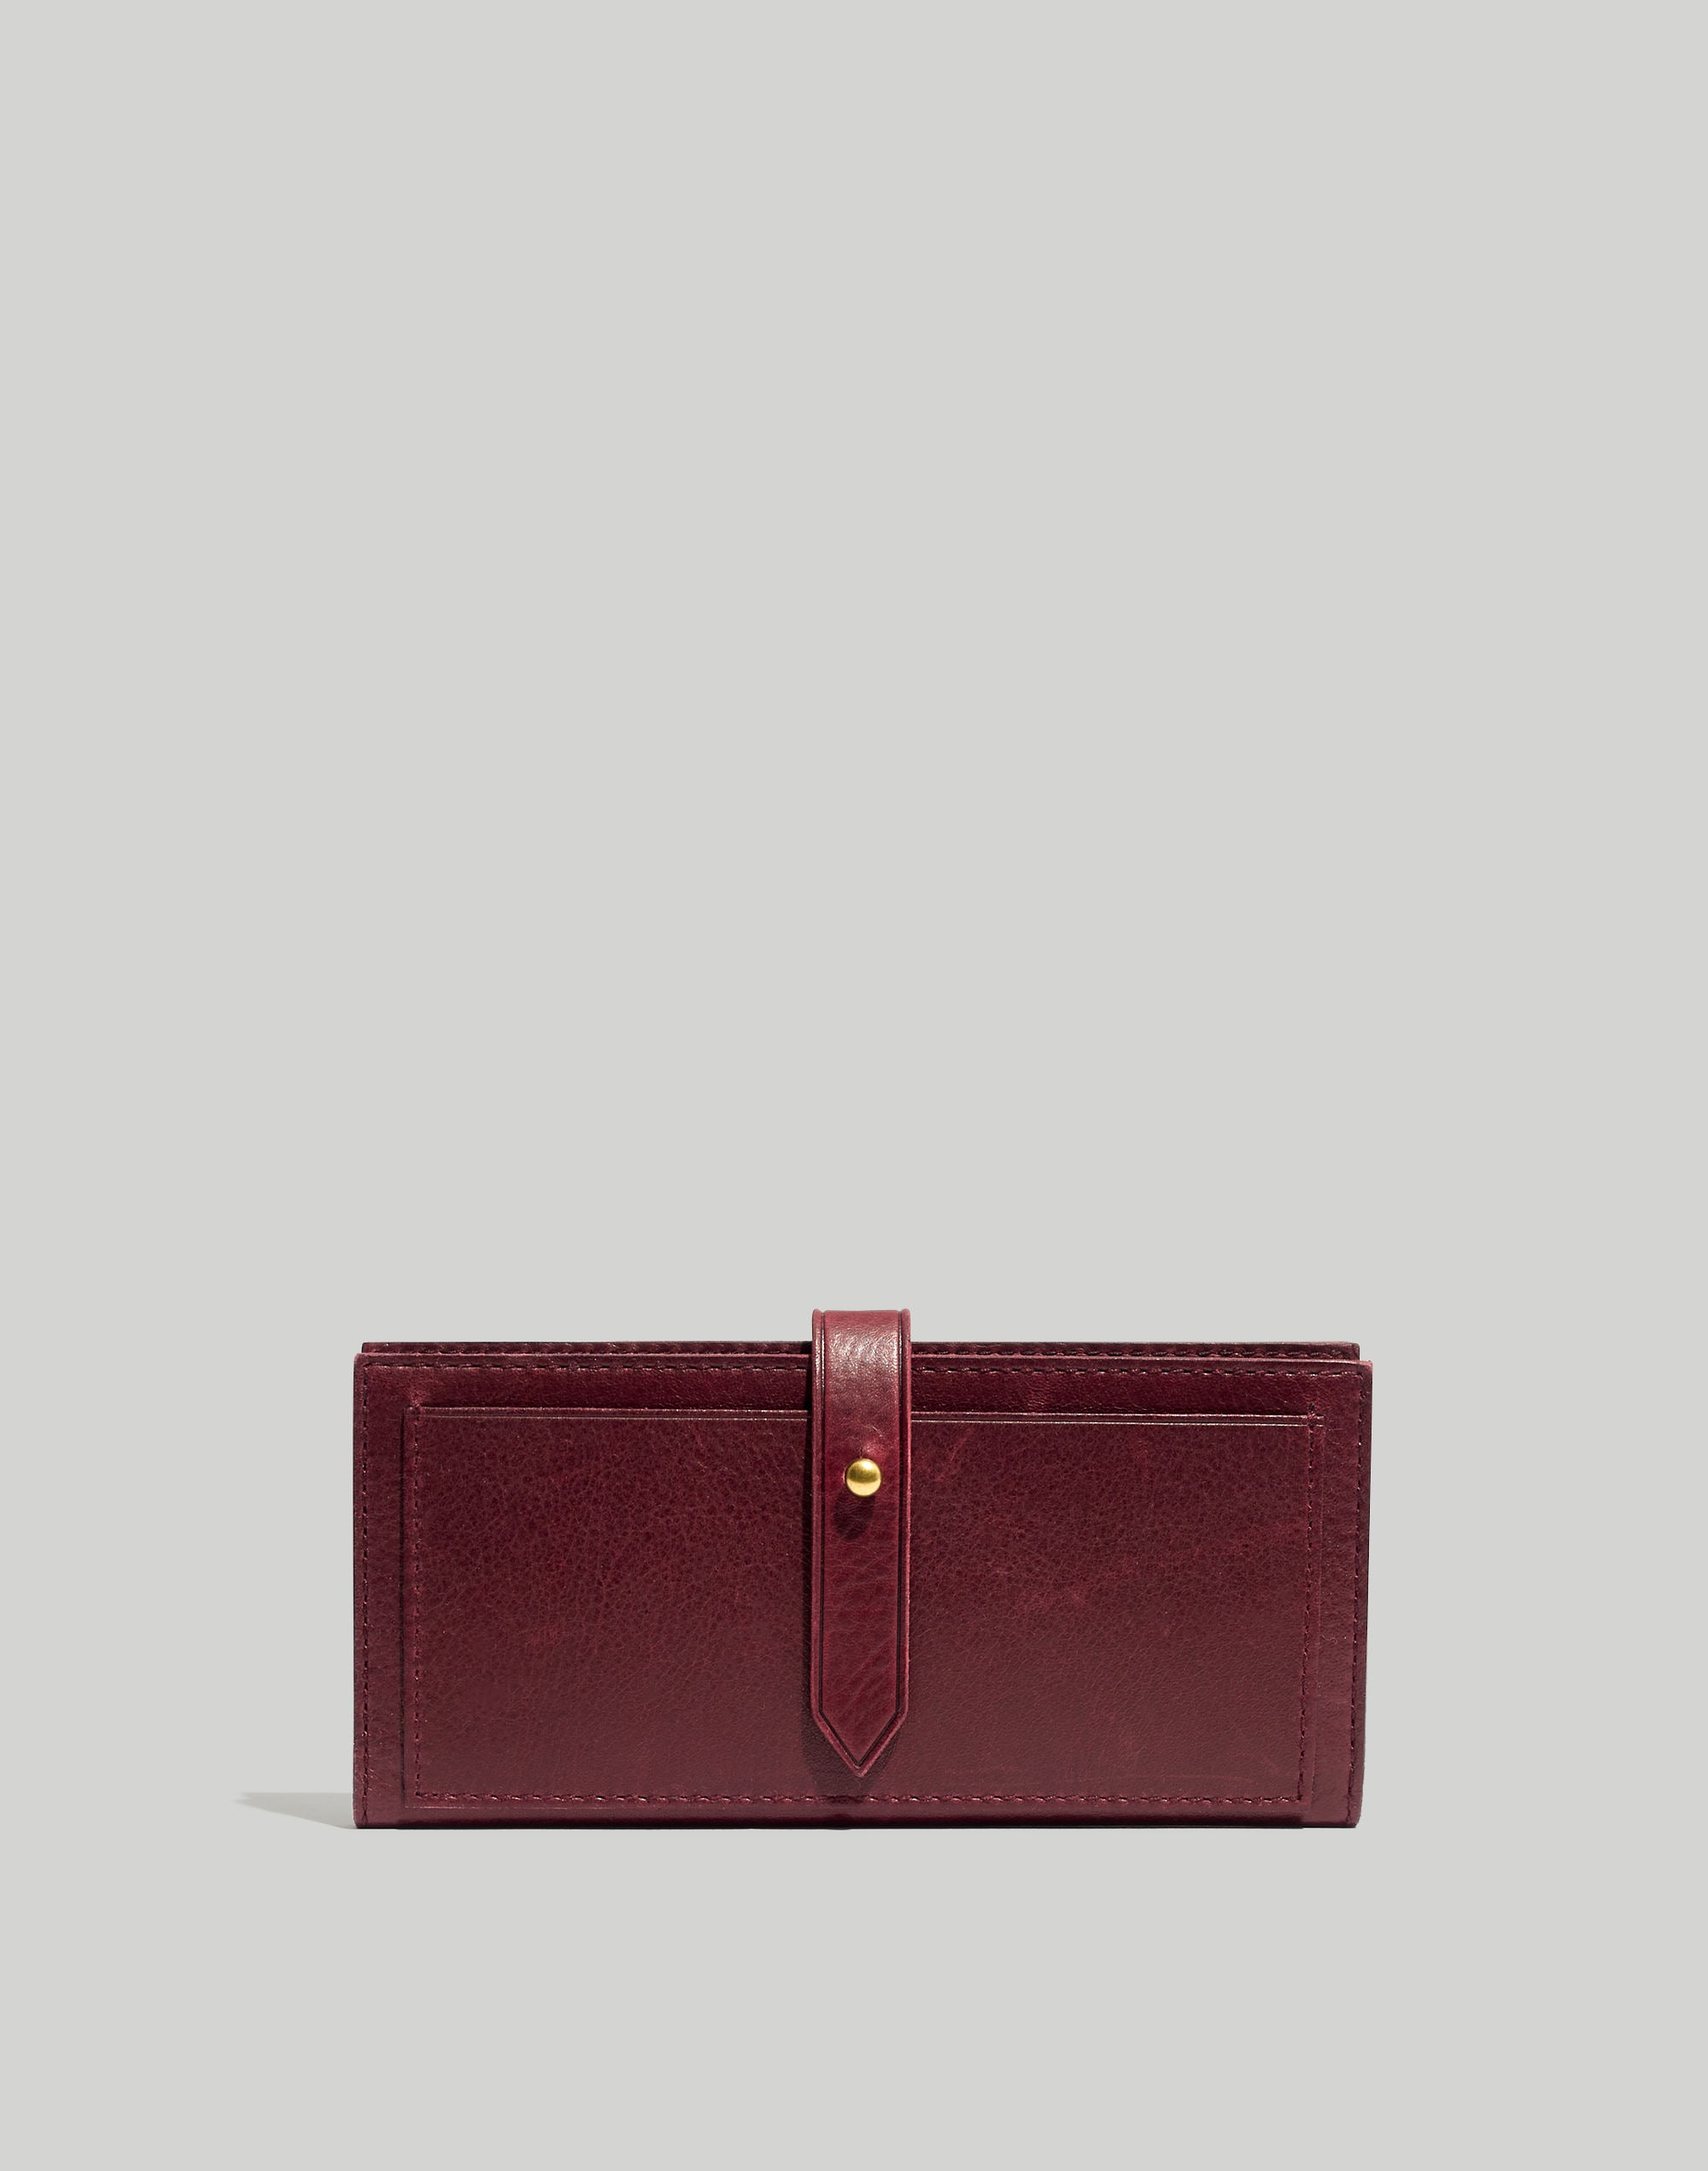 The Leather Post Wallet